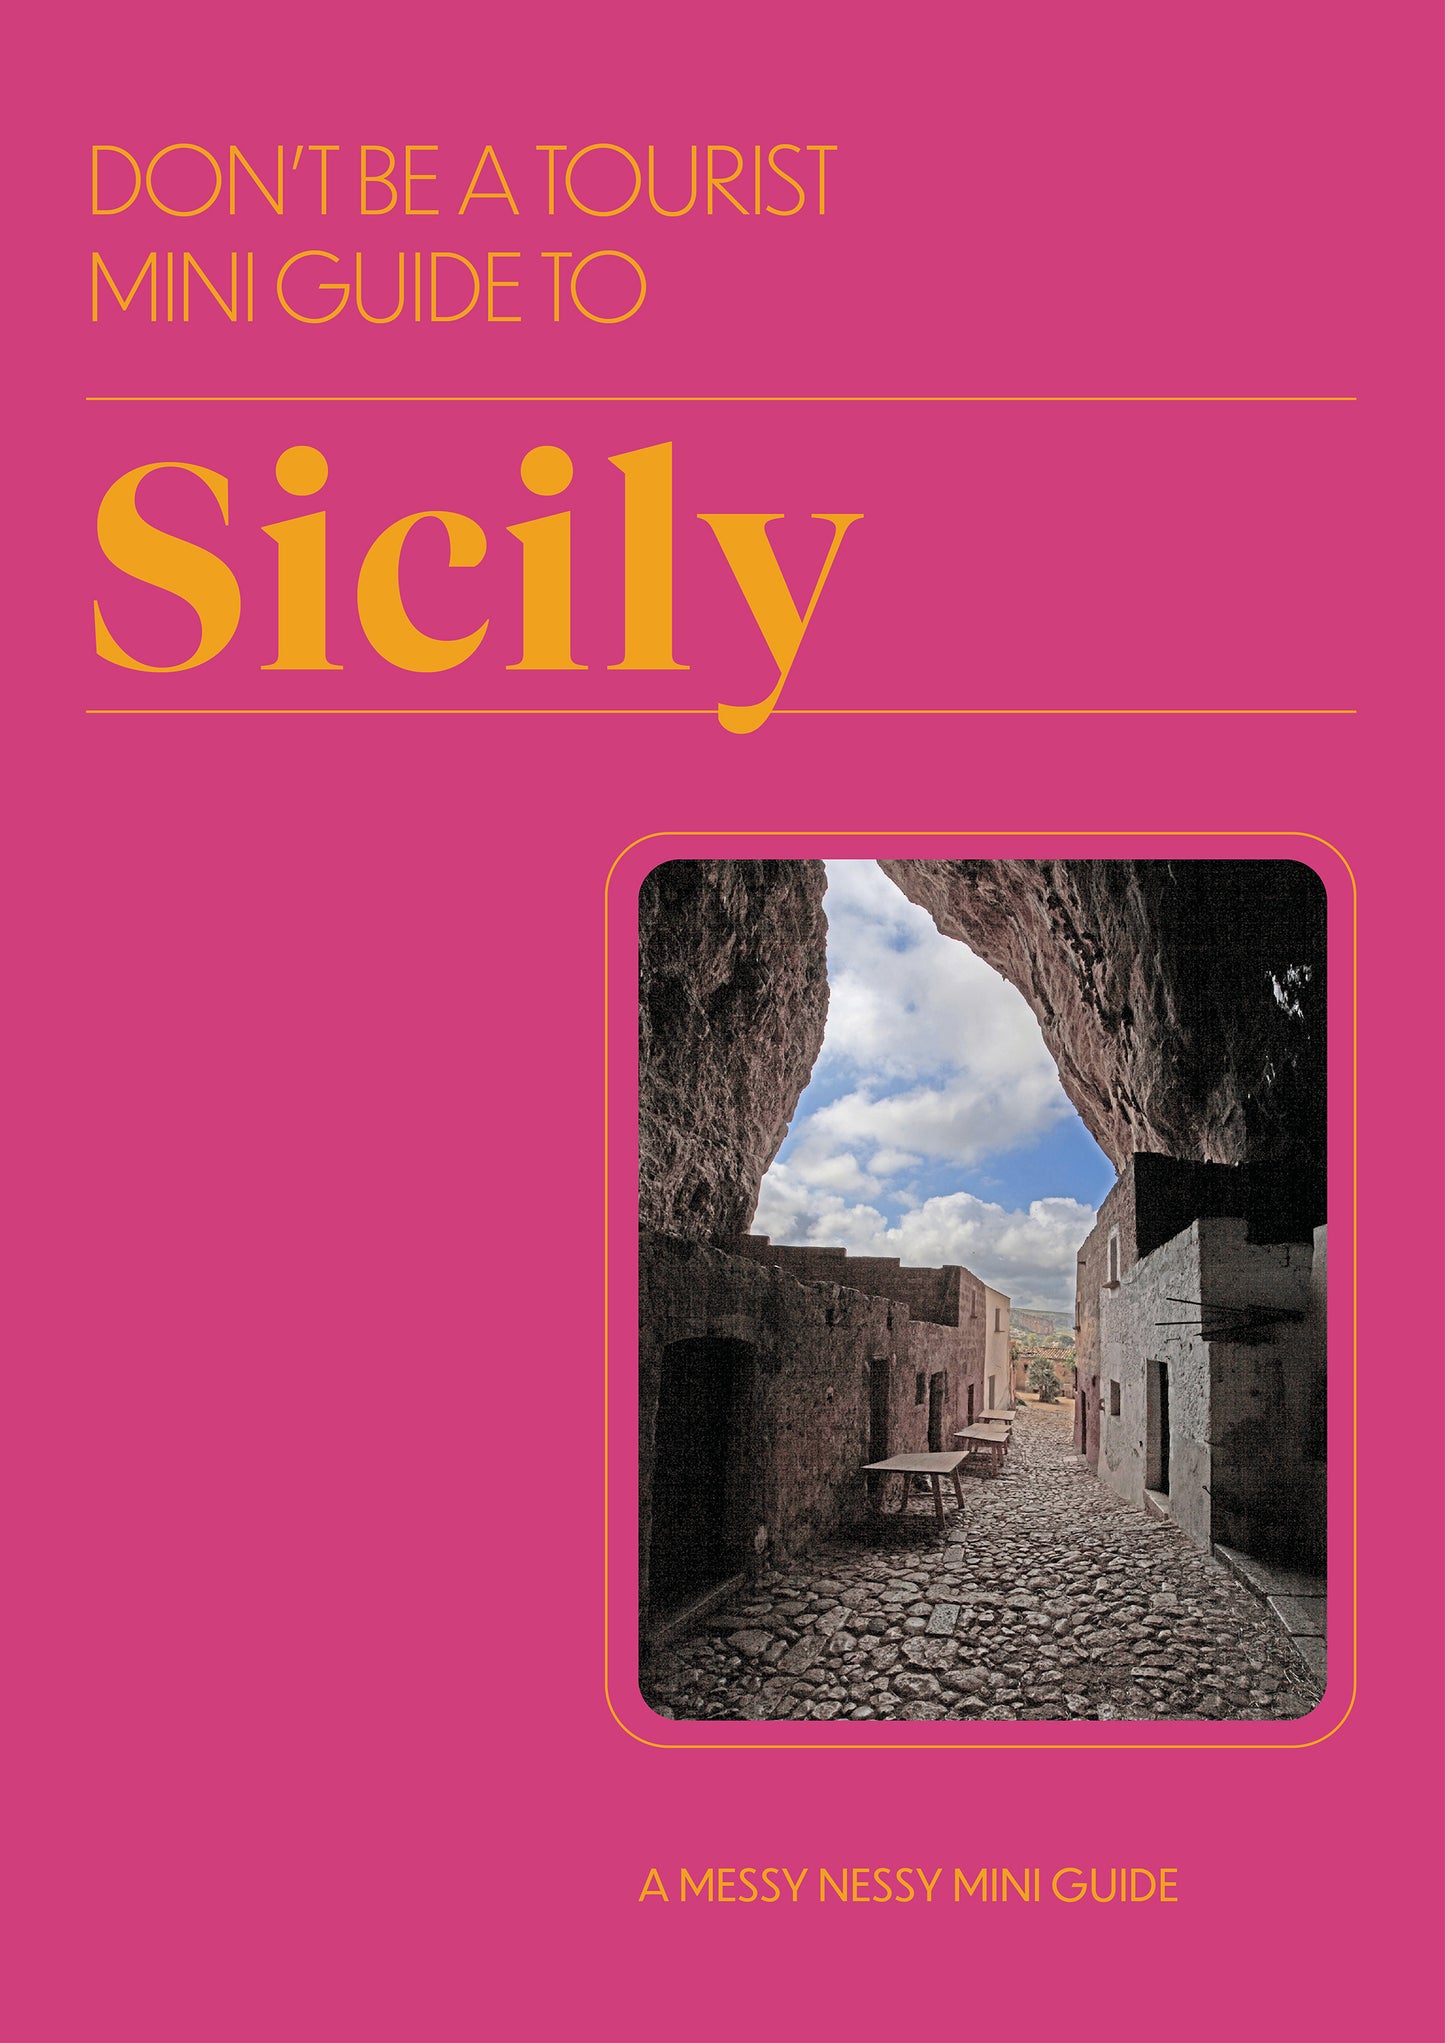 DON’T BE A TOURIST MINI GUIDE TO SICILY